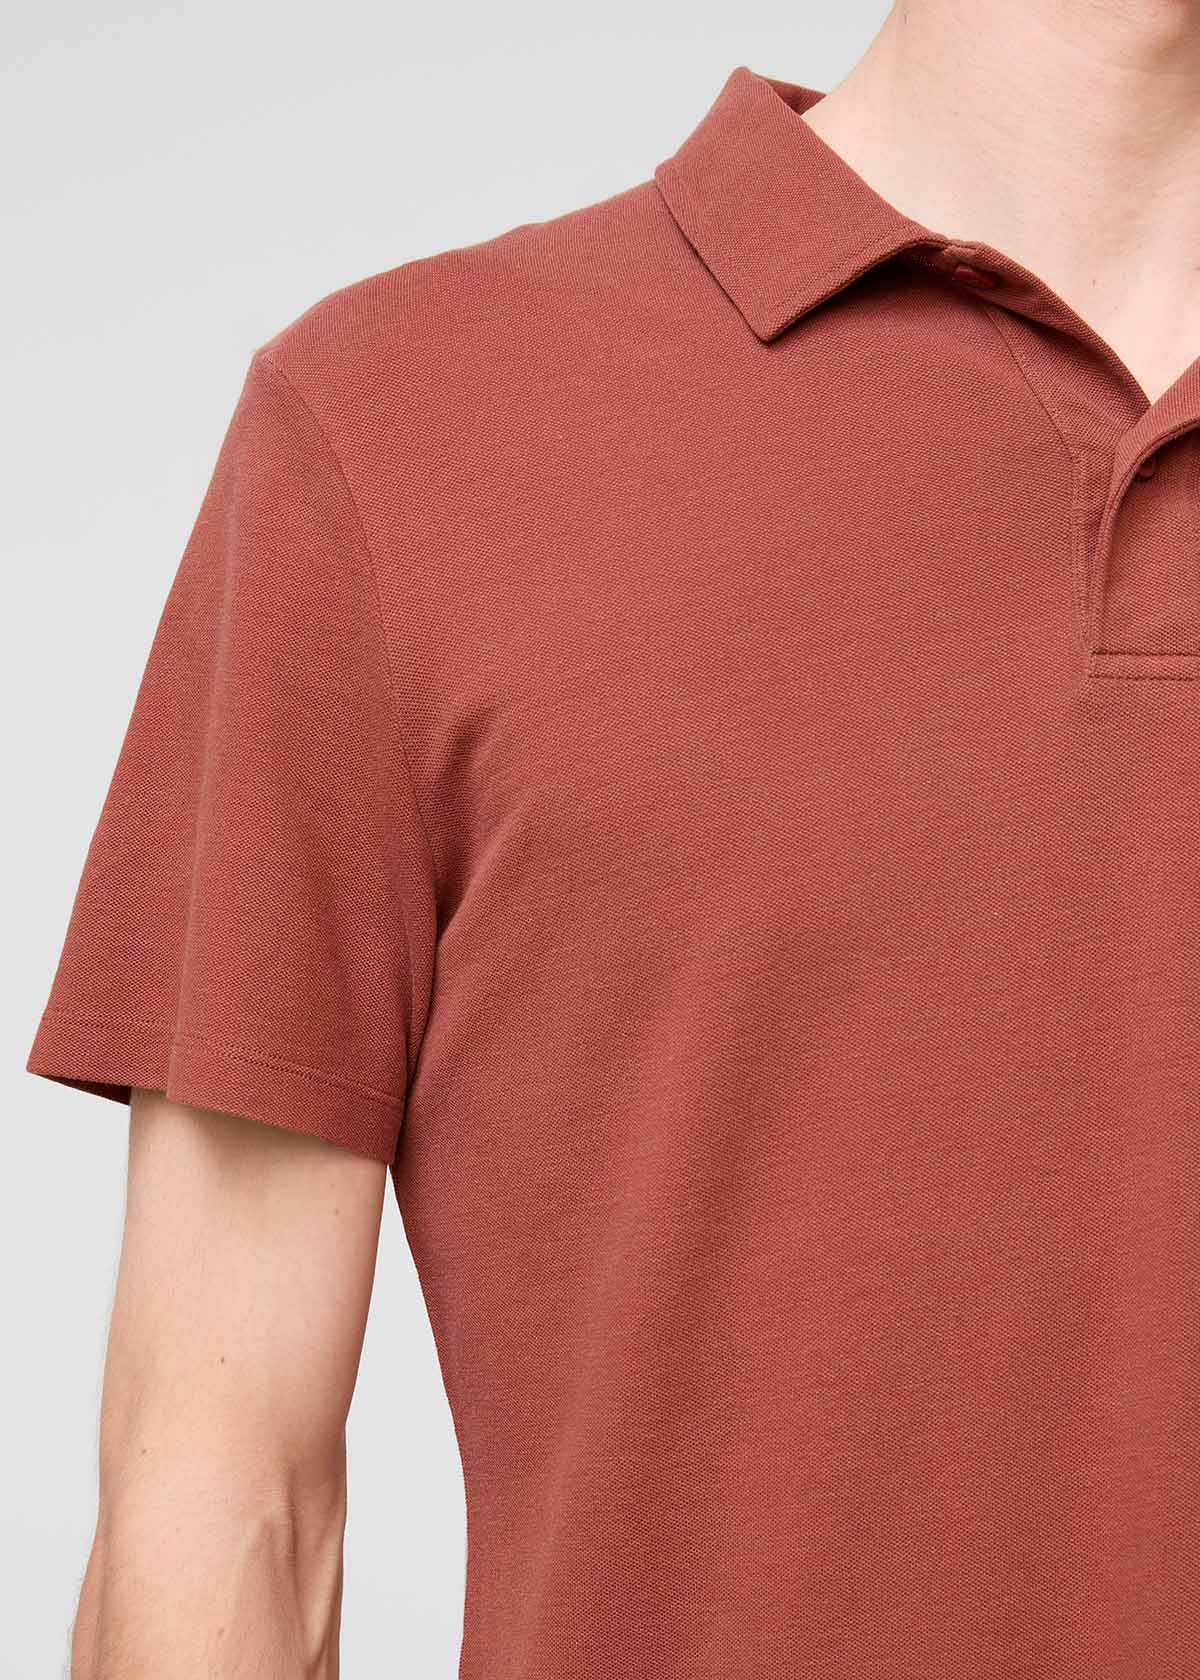 mens breathable red polo front neckline